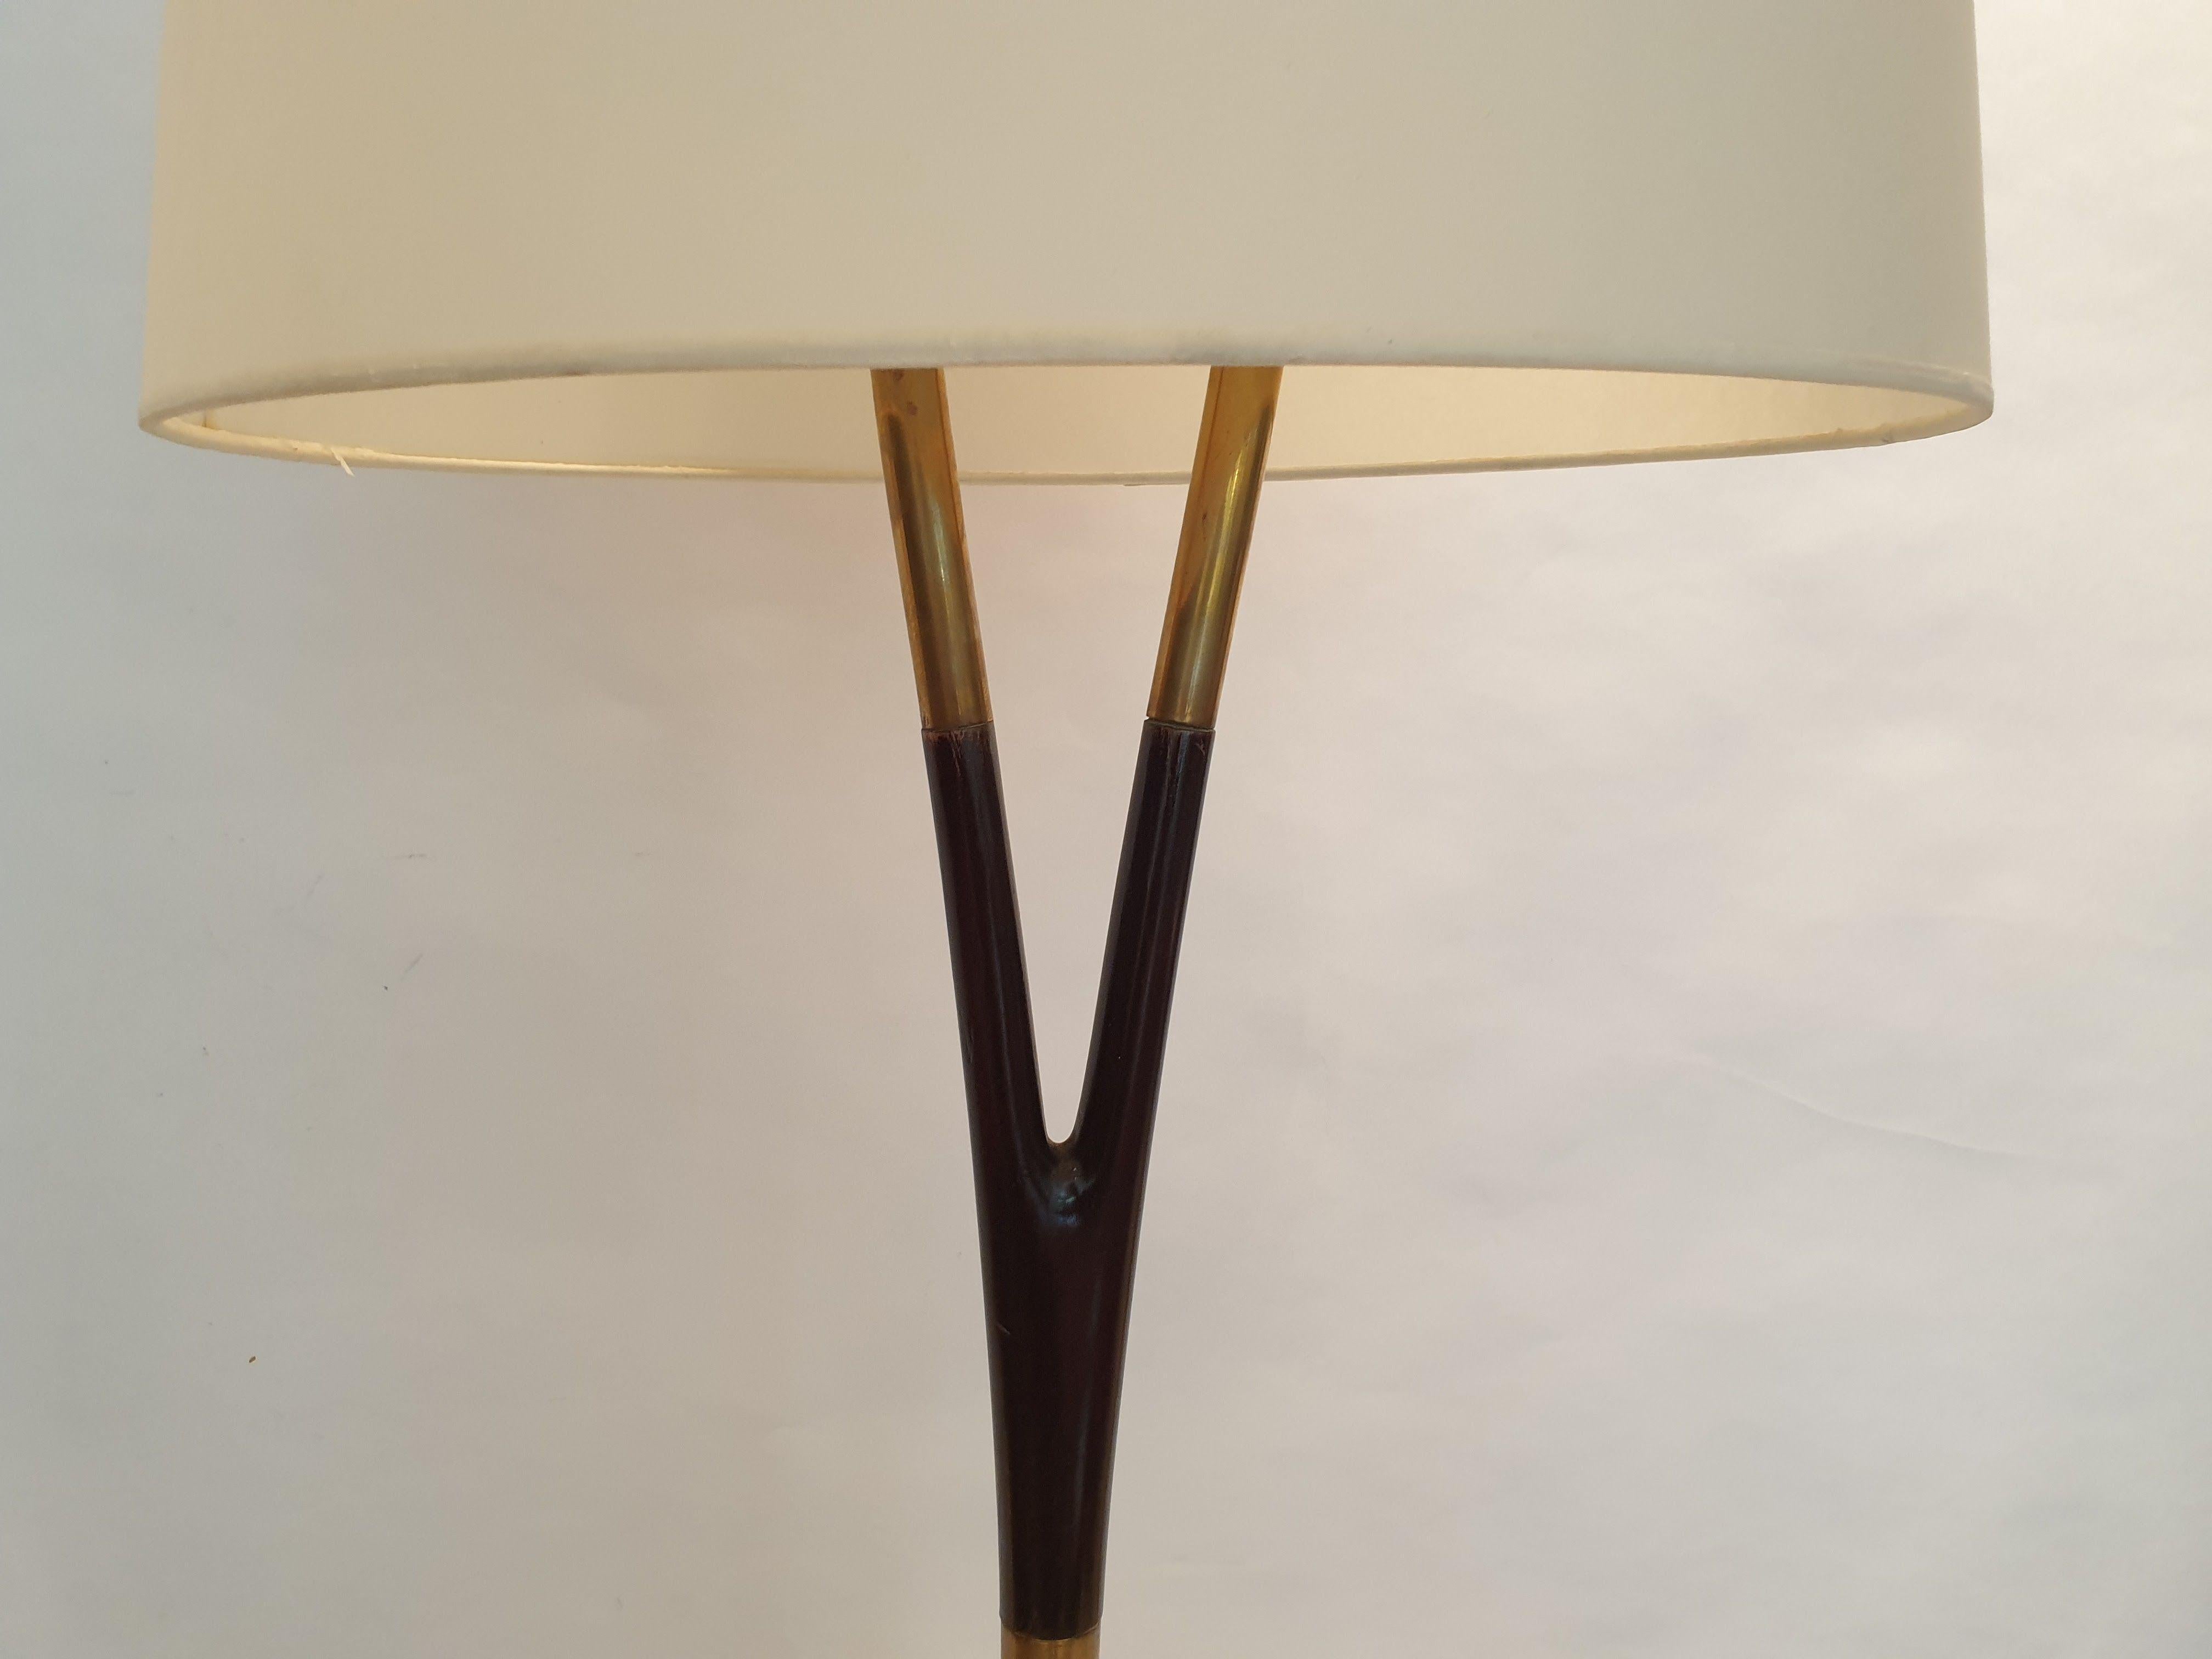 Floor lamp with polished wood stem with brass banding, sitting on a white marble base.